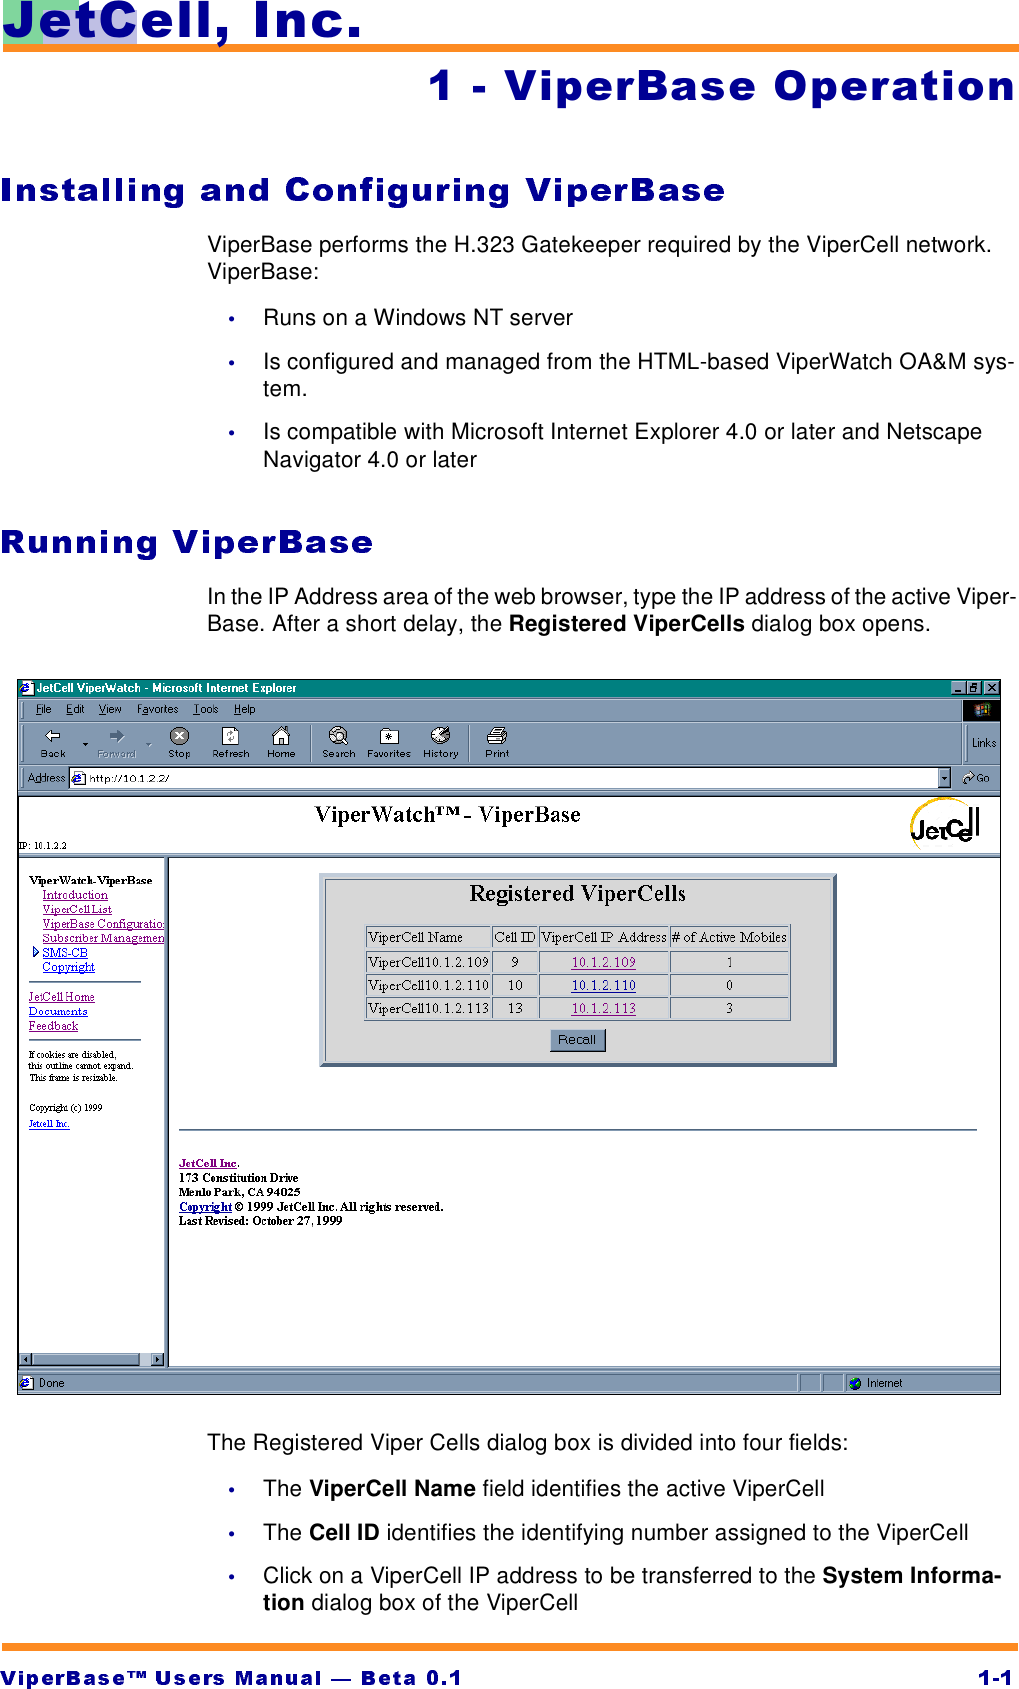 -HW&amp;HOO,QF  9LSHU%DVH2SHUDWLRQViperBase performs the H.323 Gatekeeper required by the ViperCell network. ViperBase:•Runs on a Windows NT server•Is configured and managed from the HTML-based ViperWatch OA&amp;M sys-tem.•Is compatible with Microsoft Internet Explorer 4.0 or later and Netscape Navigator 4.0 or laterIn the IP Address area of the web browser, type the IP address of the active Viper-Base. After a short delay, the Registered ViperCells dialog box opens.The Registered Viper Cells dialog box is divided into four fields:•The ViperCell Name field identifies the active ViperCell•The Cell ID identifies the identifying number assigned to the ViperCell•Click on a ViperCell IP address to be transferred to the System Informa-tion dialog box of the ViperCell